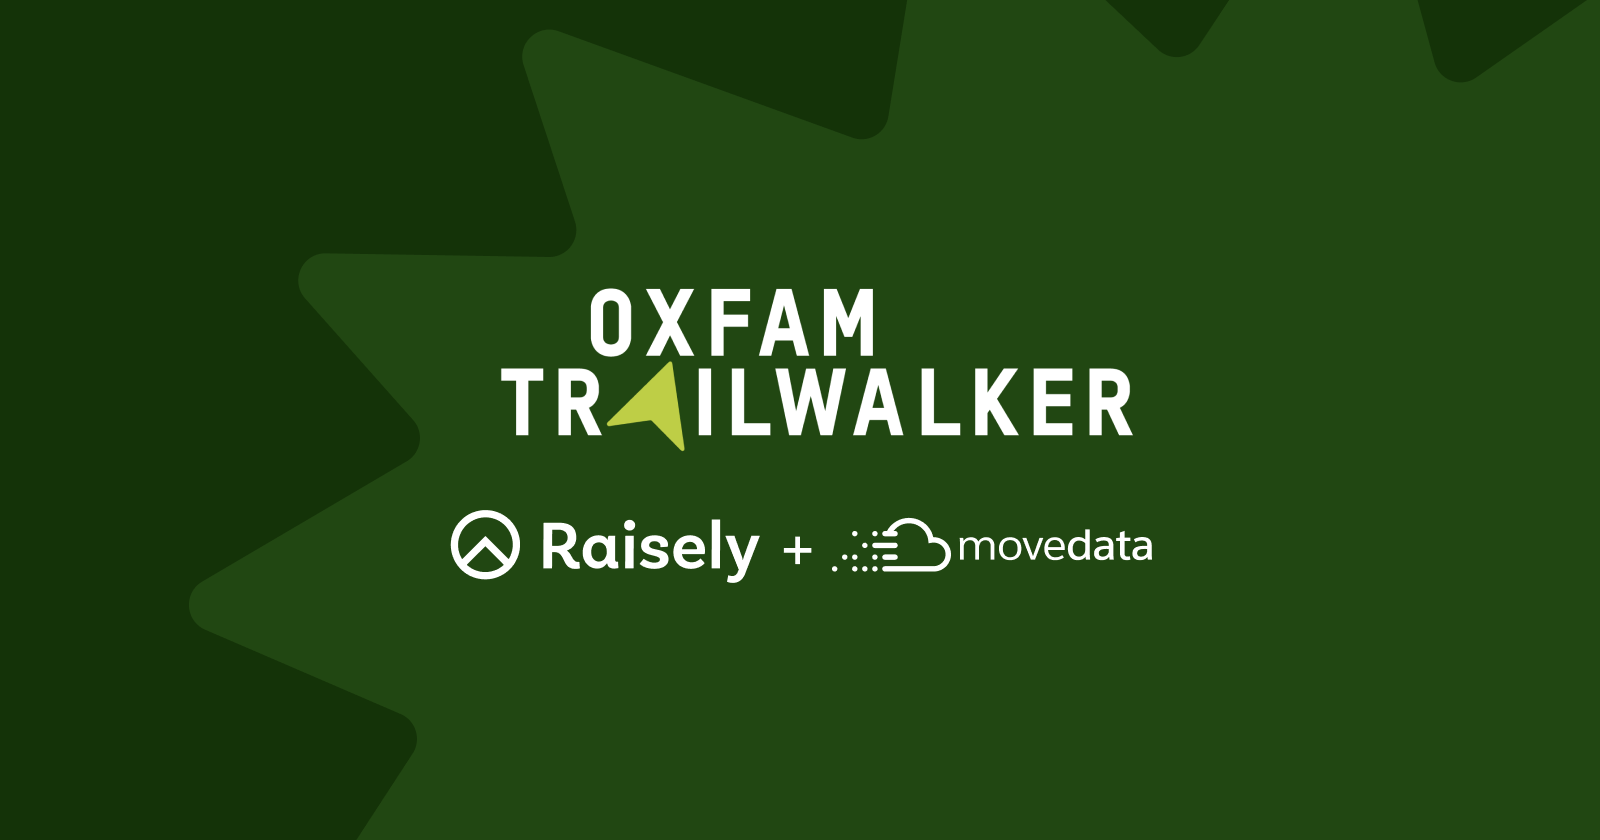 Image of Oxfam Trailwalker, Raisely and Movedata logos.